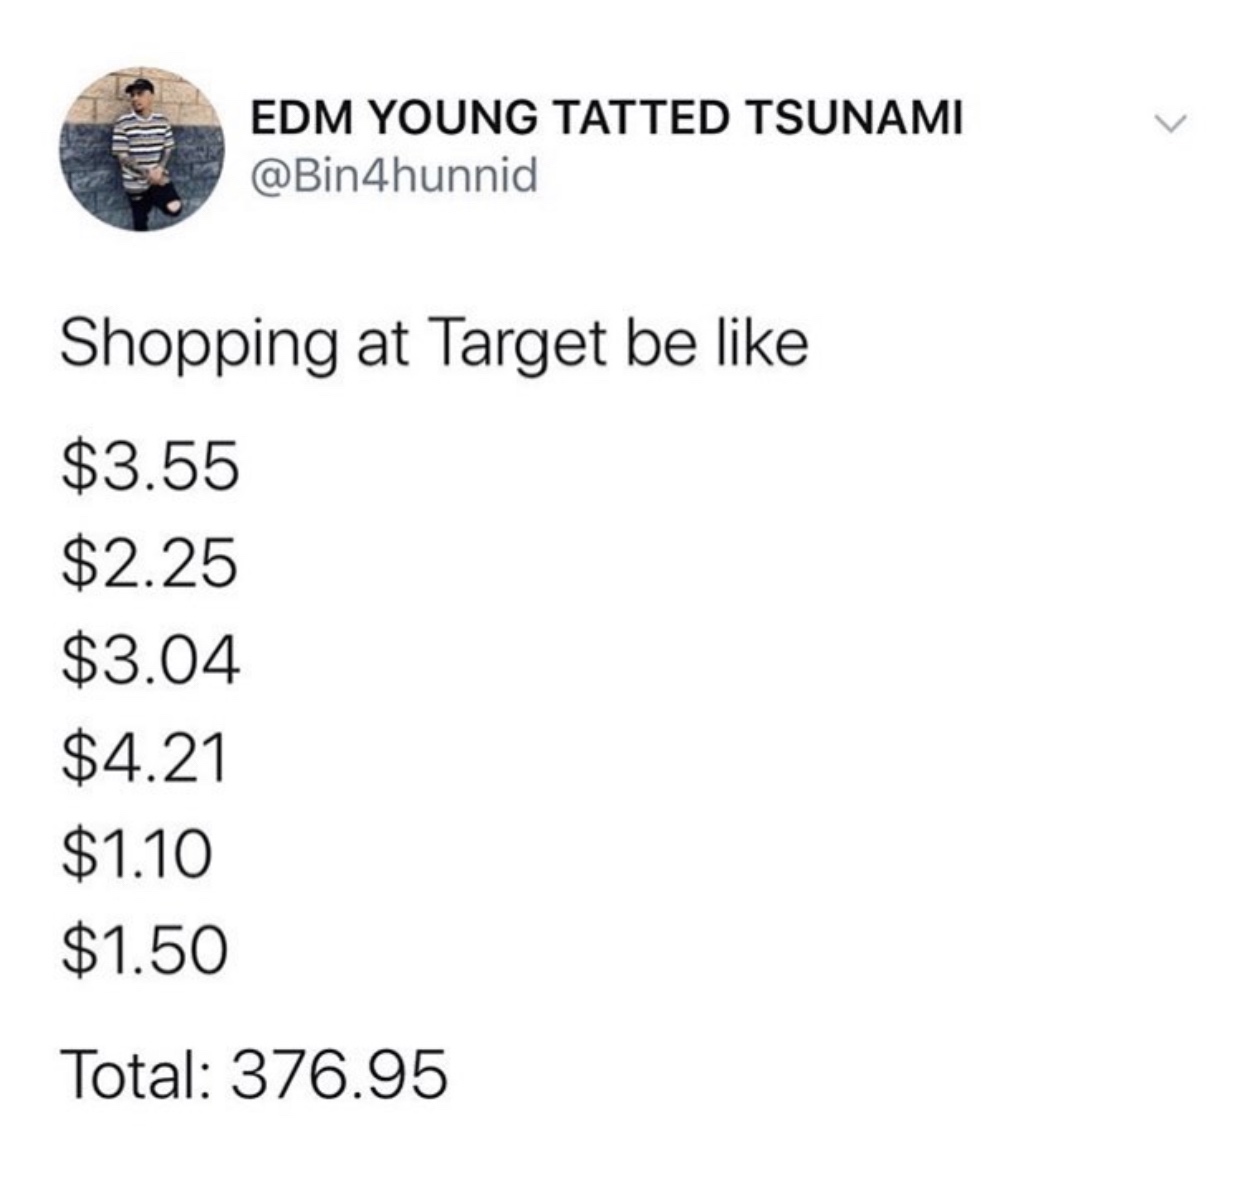 angle - Edm Young Tatted Tsunami Shopping at Target be $3.55 $2.25 $3.04 $4.21 $1.10 $1.50 Total 376.95